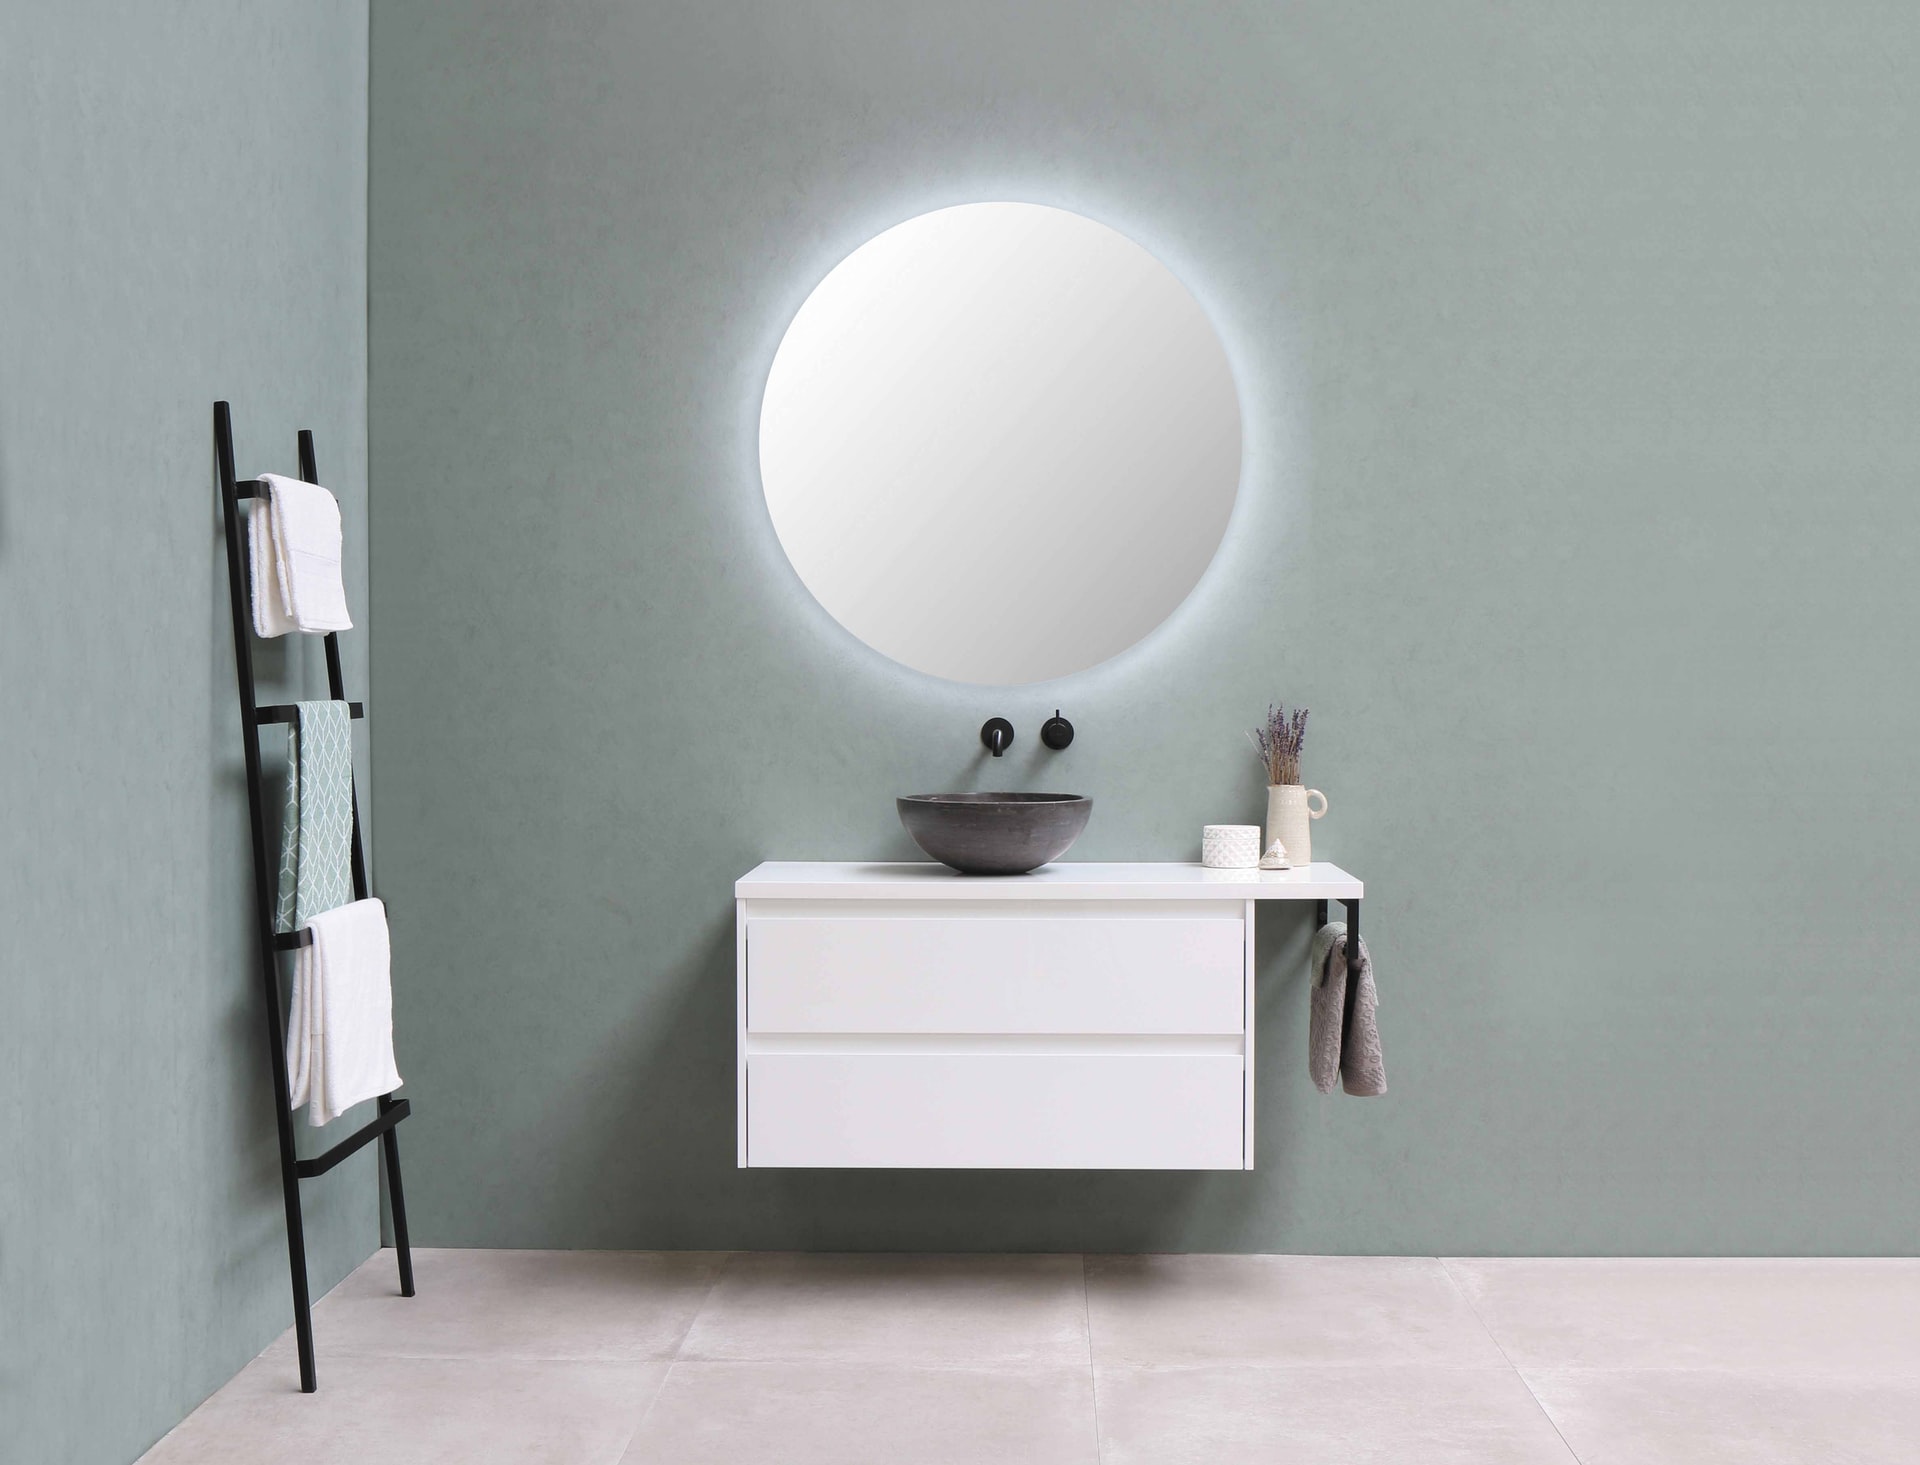 How to Use Bathroom Mirrors to Add Light and Space